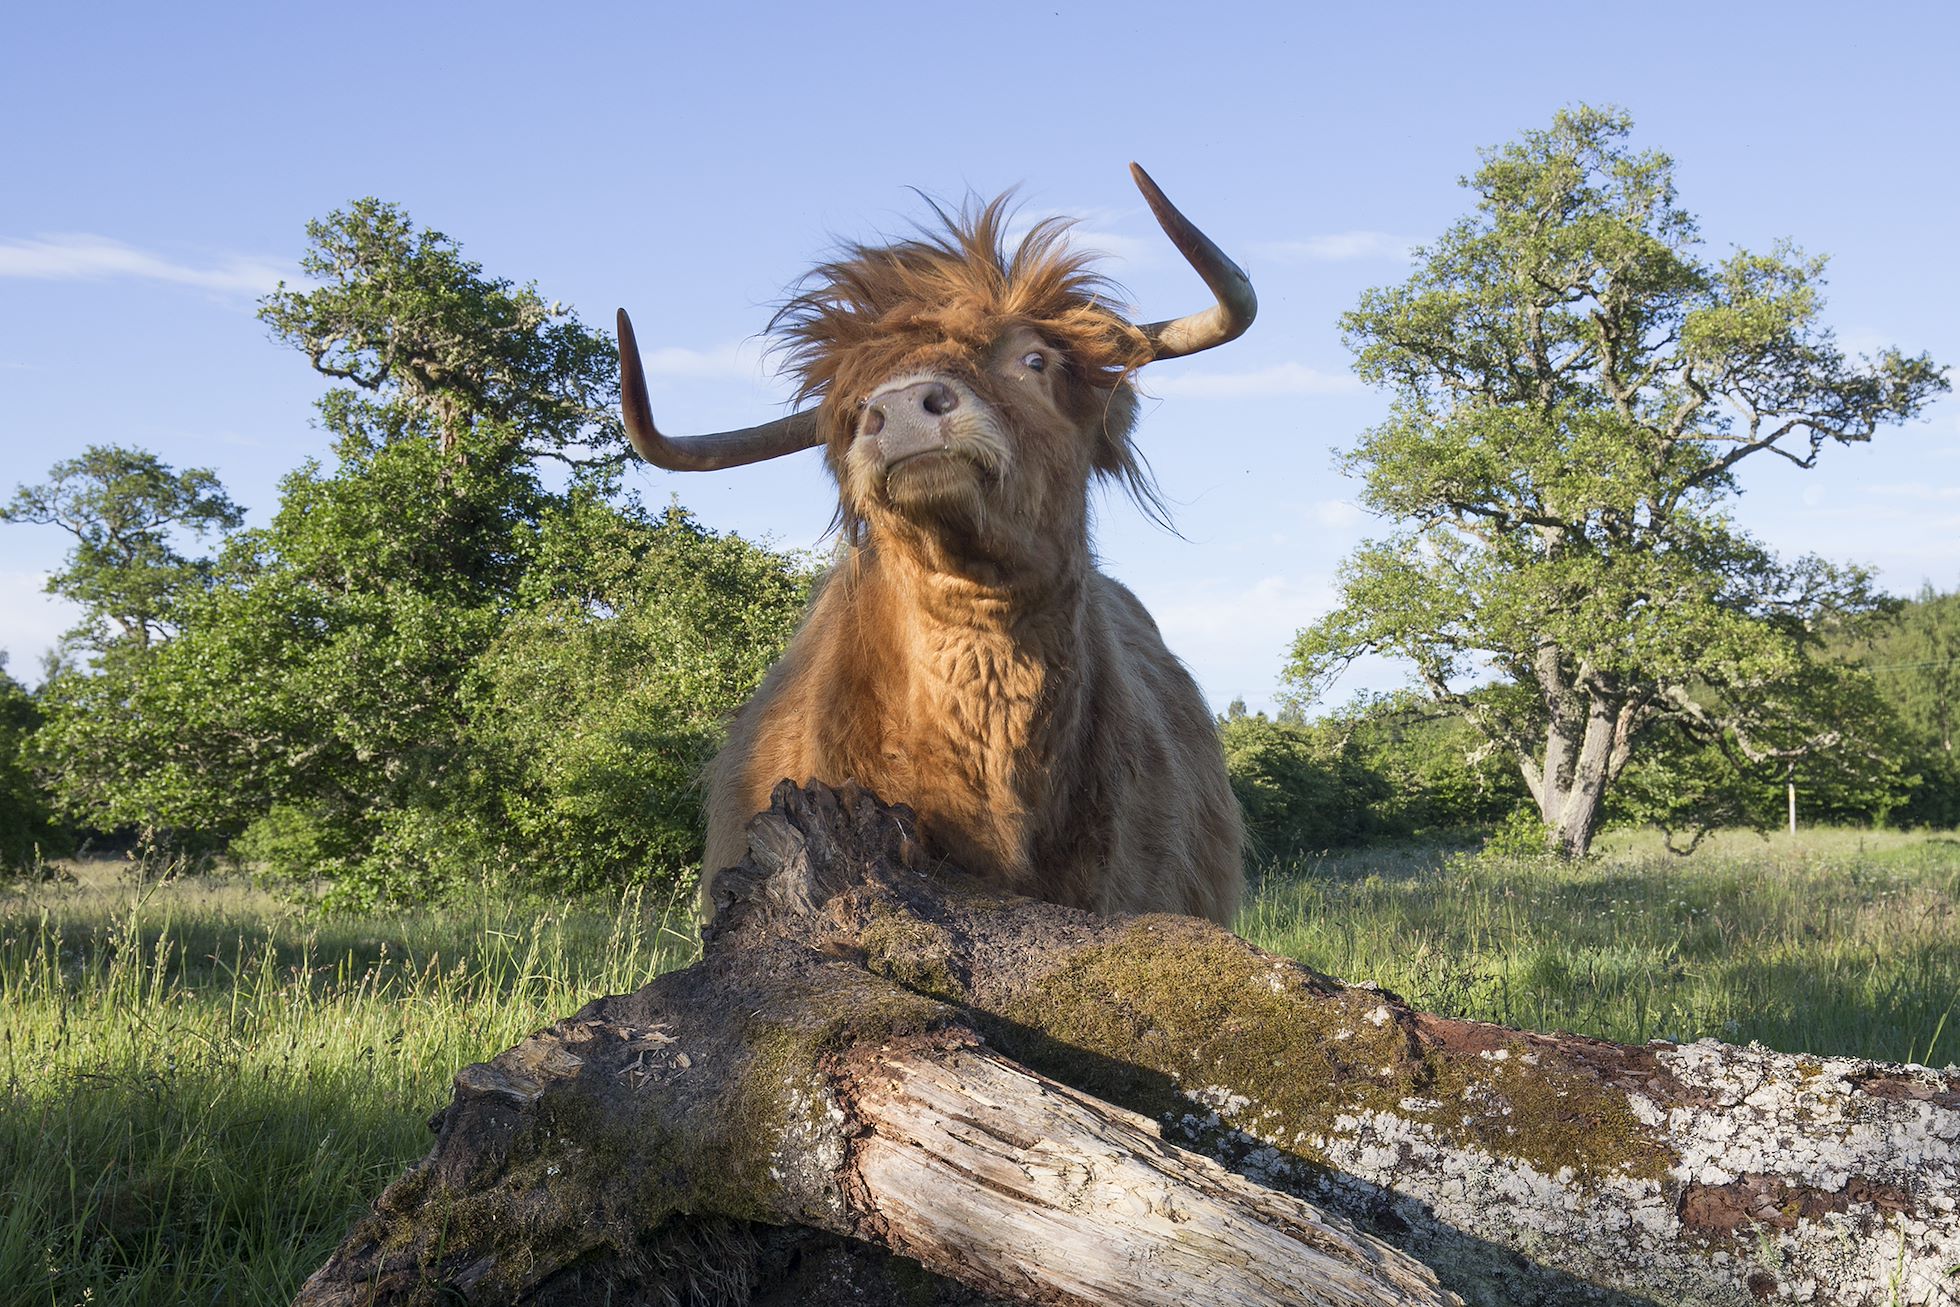 Highland cow in wood pasture in summer, Cairngorms National Park, Scotland.